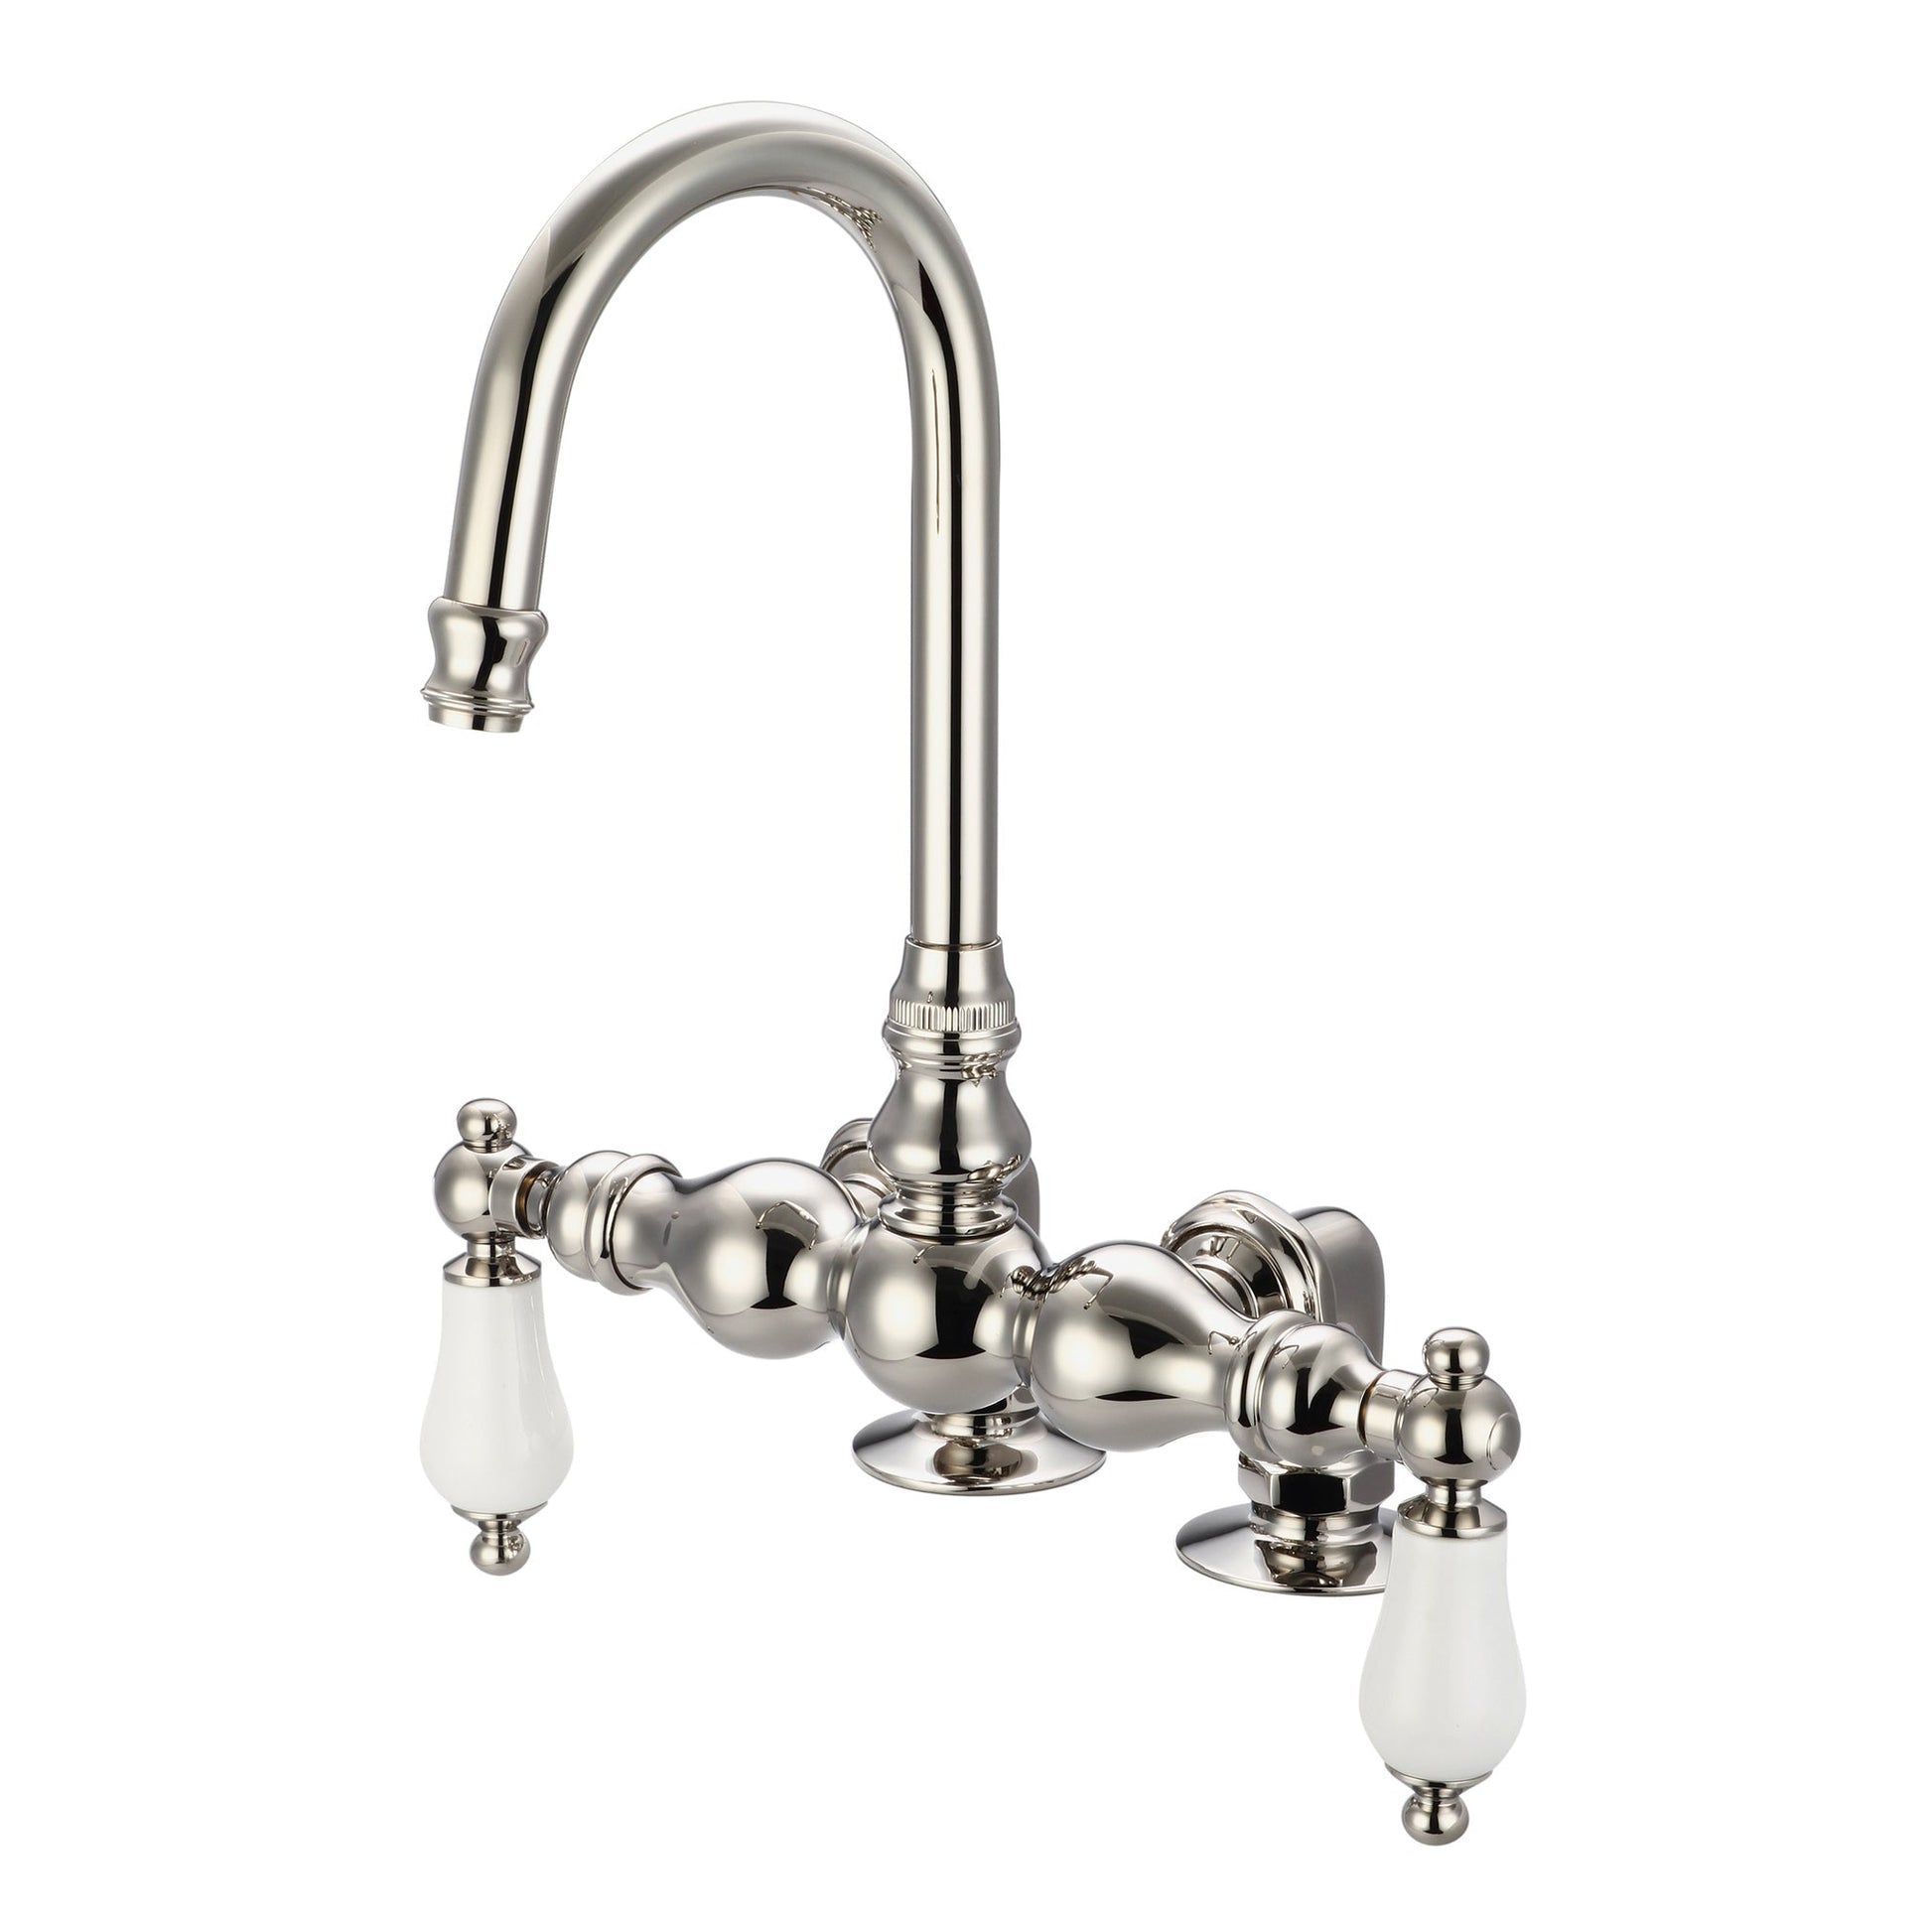 Water Creation Vintage Classic Center Deck Mount Tub F6-0016 9.25" Ivory Solid Brass Faucet With Gooseneck Spout And 2-Inch Risers And Porcelain Lever Handles Without Labels